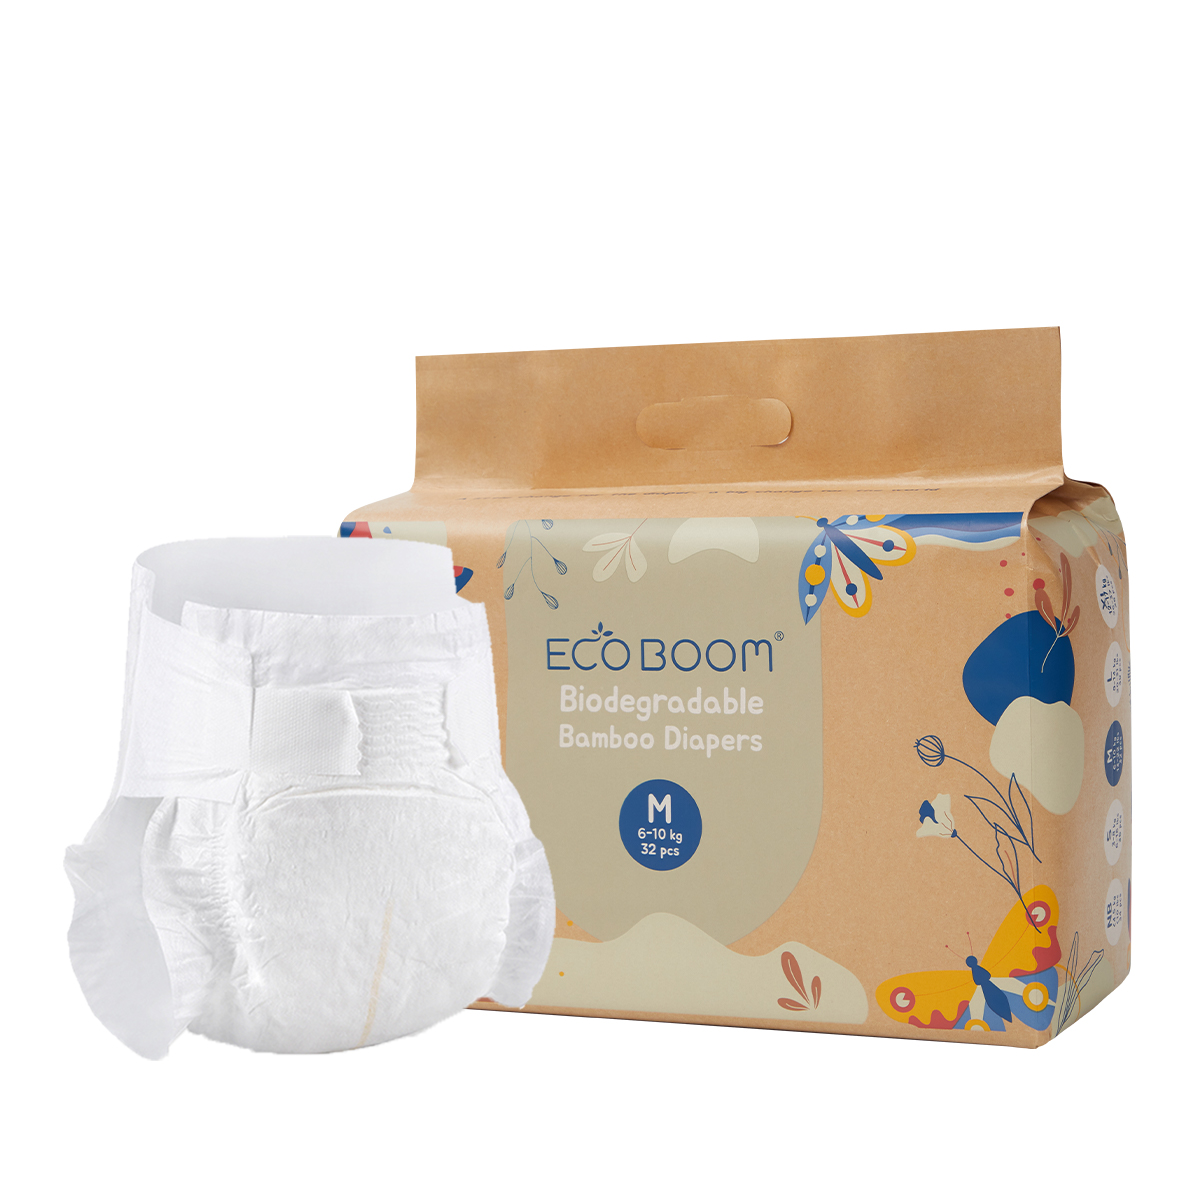 ECO BOOM organic disposable diapers company-2